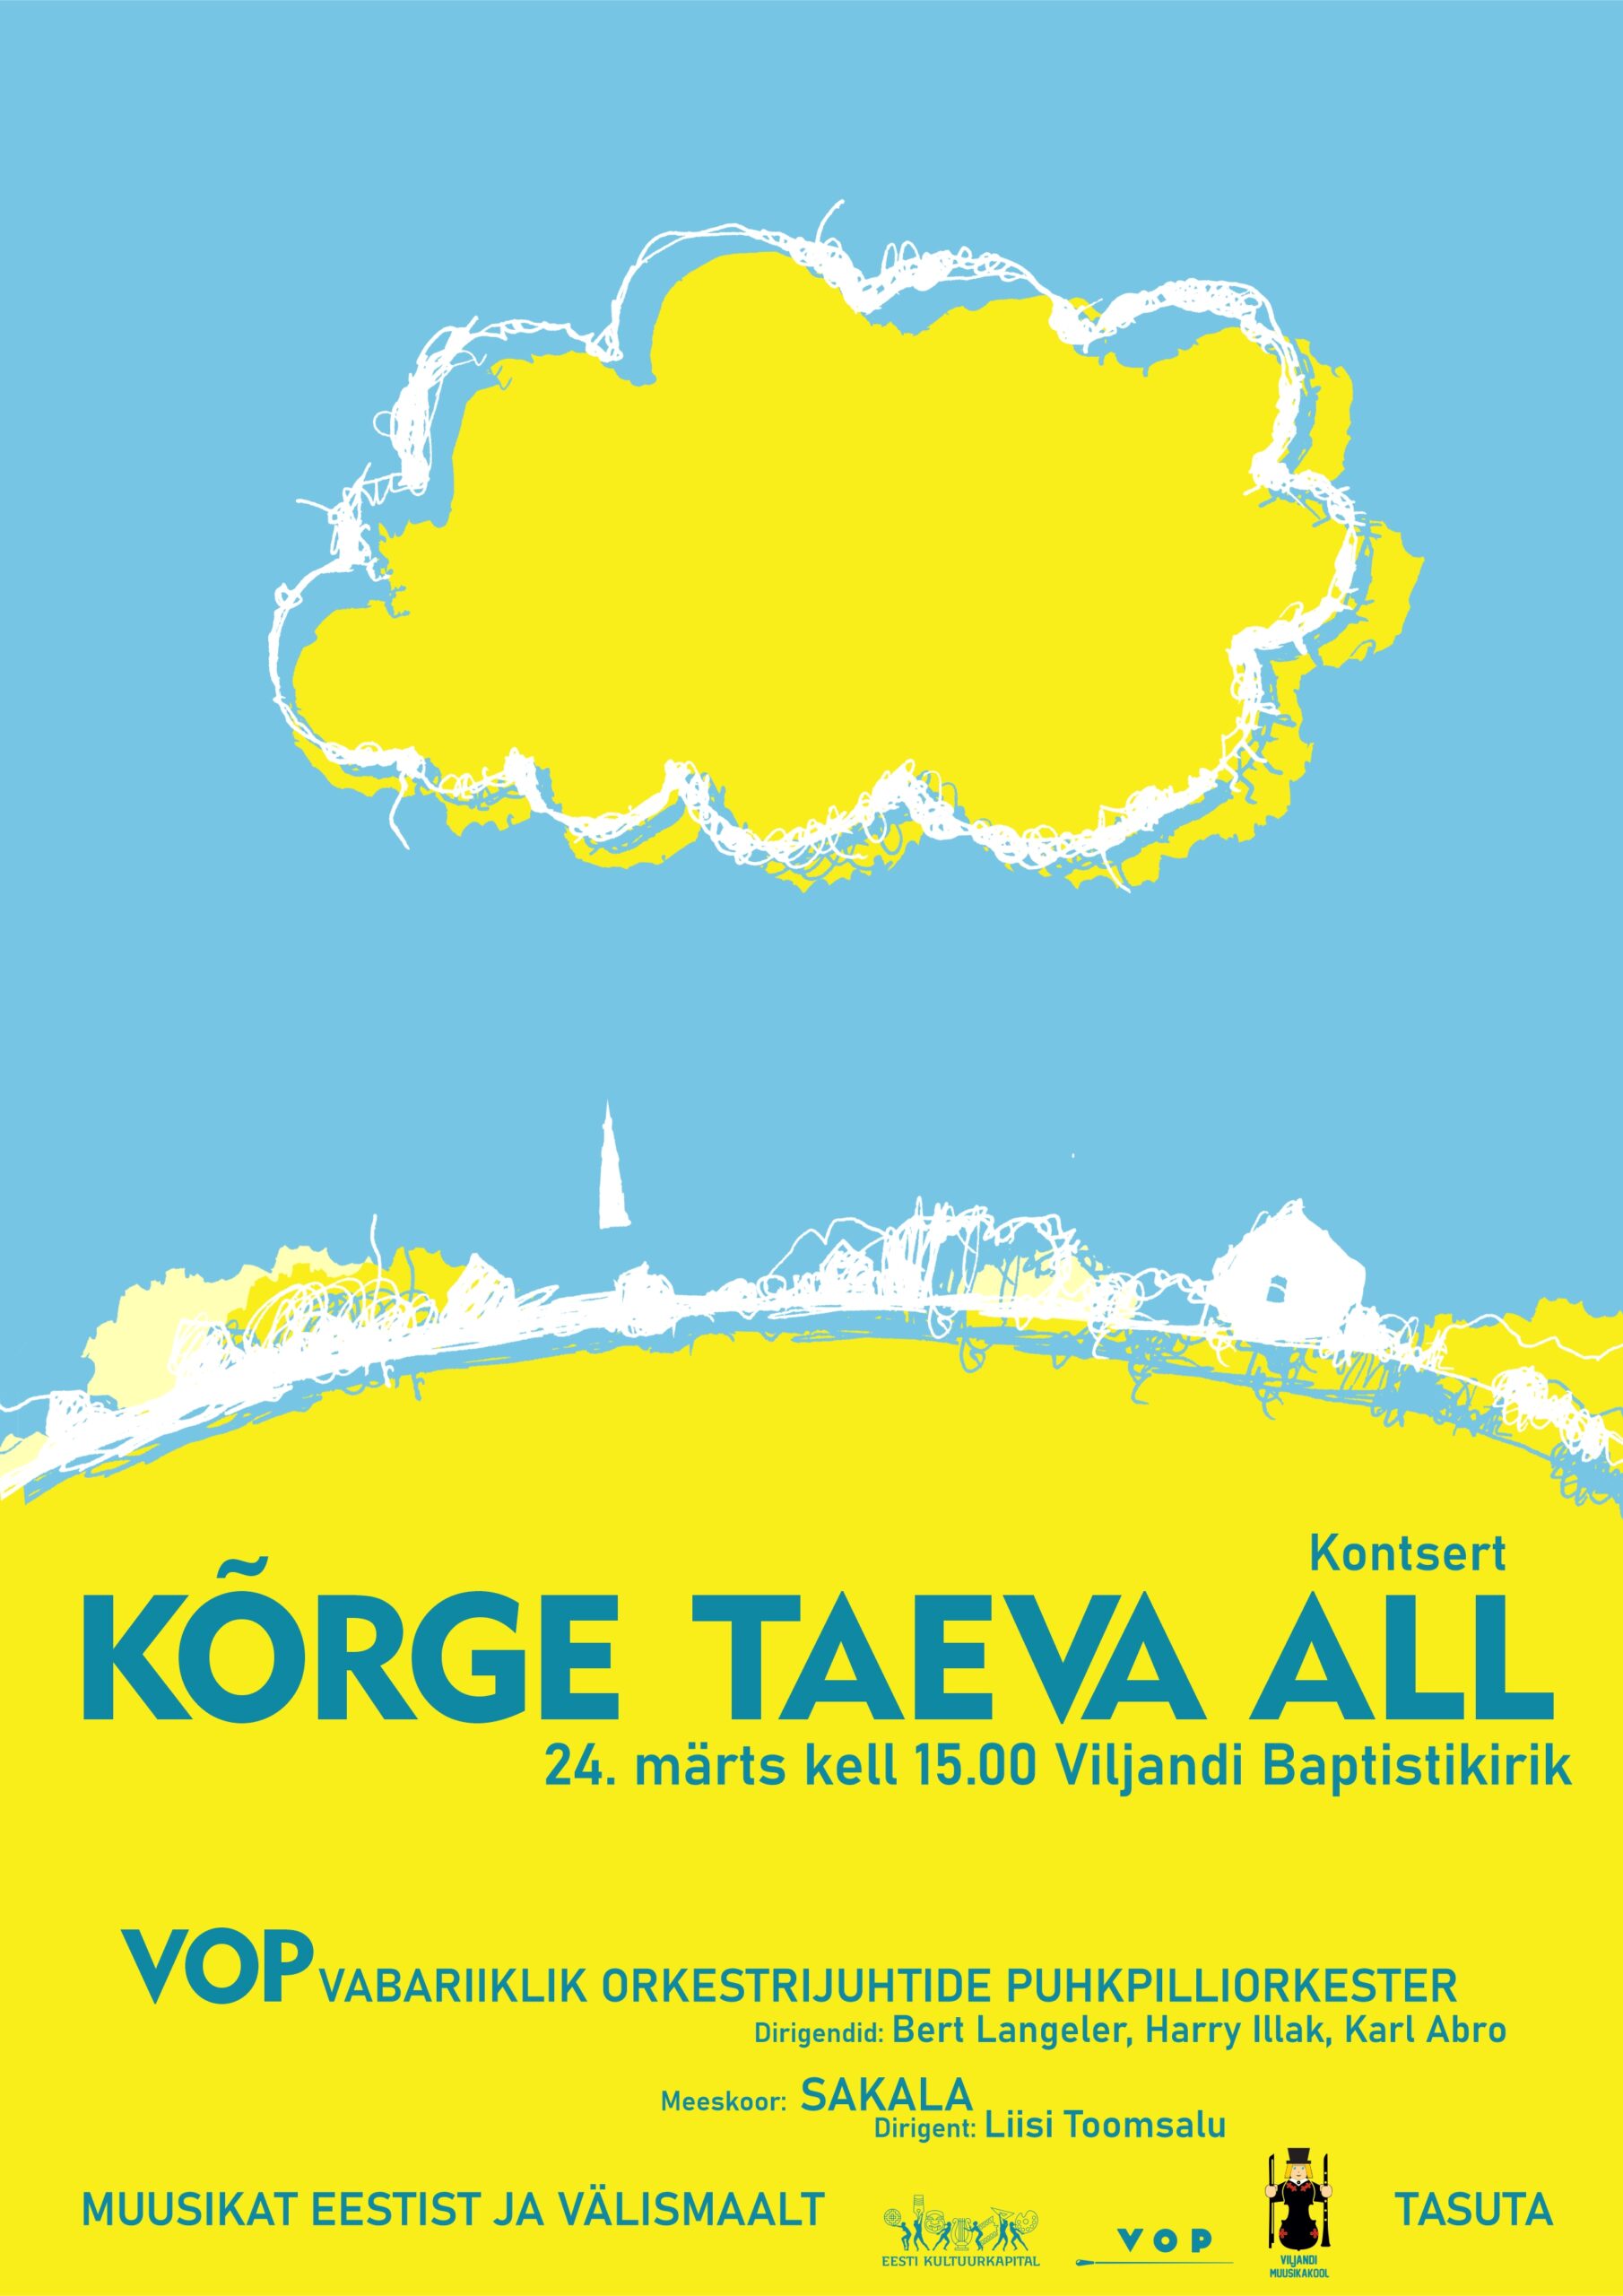 VOP concert "Kõrge taeva all" ("Under the High Sky")